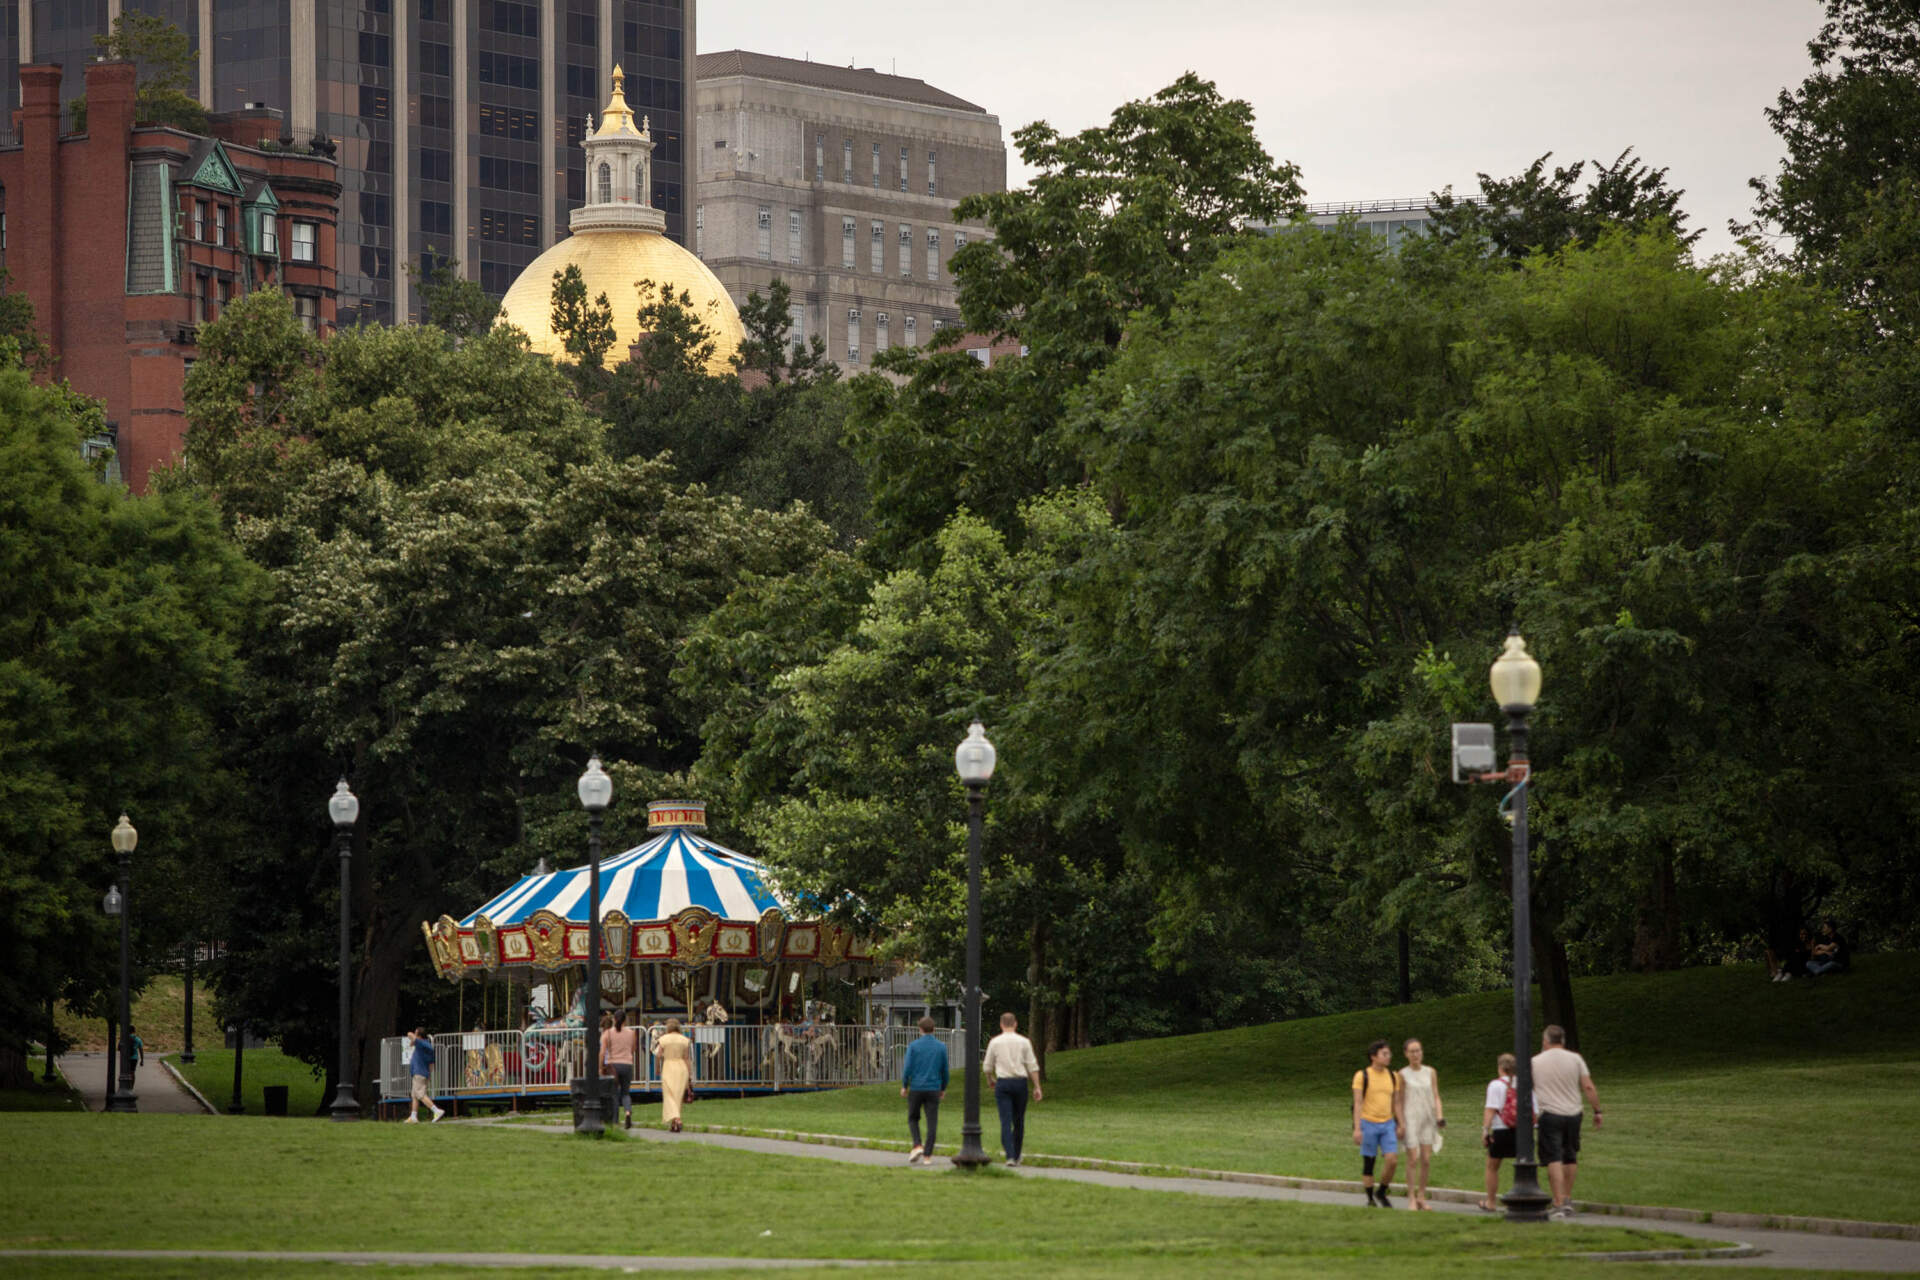 The dome of the Massachusetts State House seen above the trees from across Boston Common. (Robin Lubbock/WBUR)